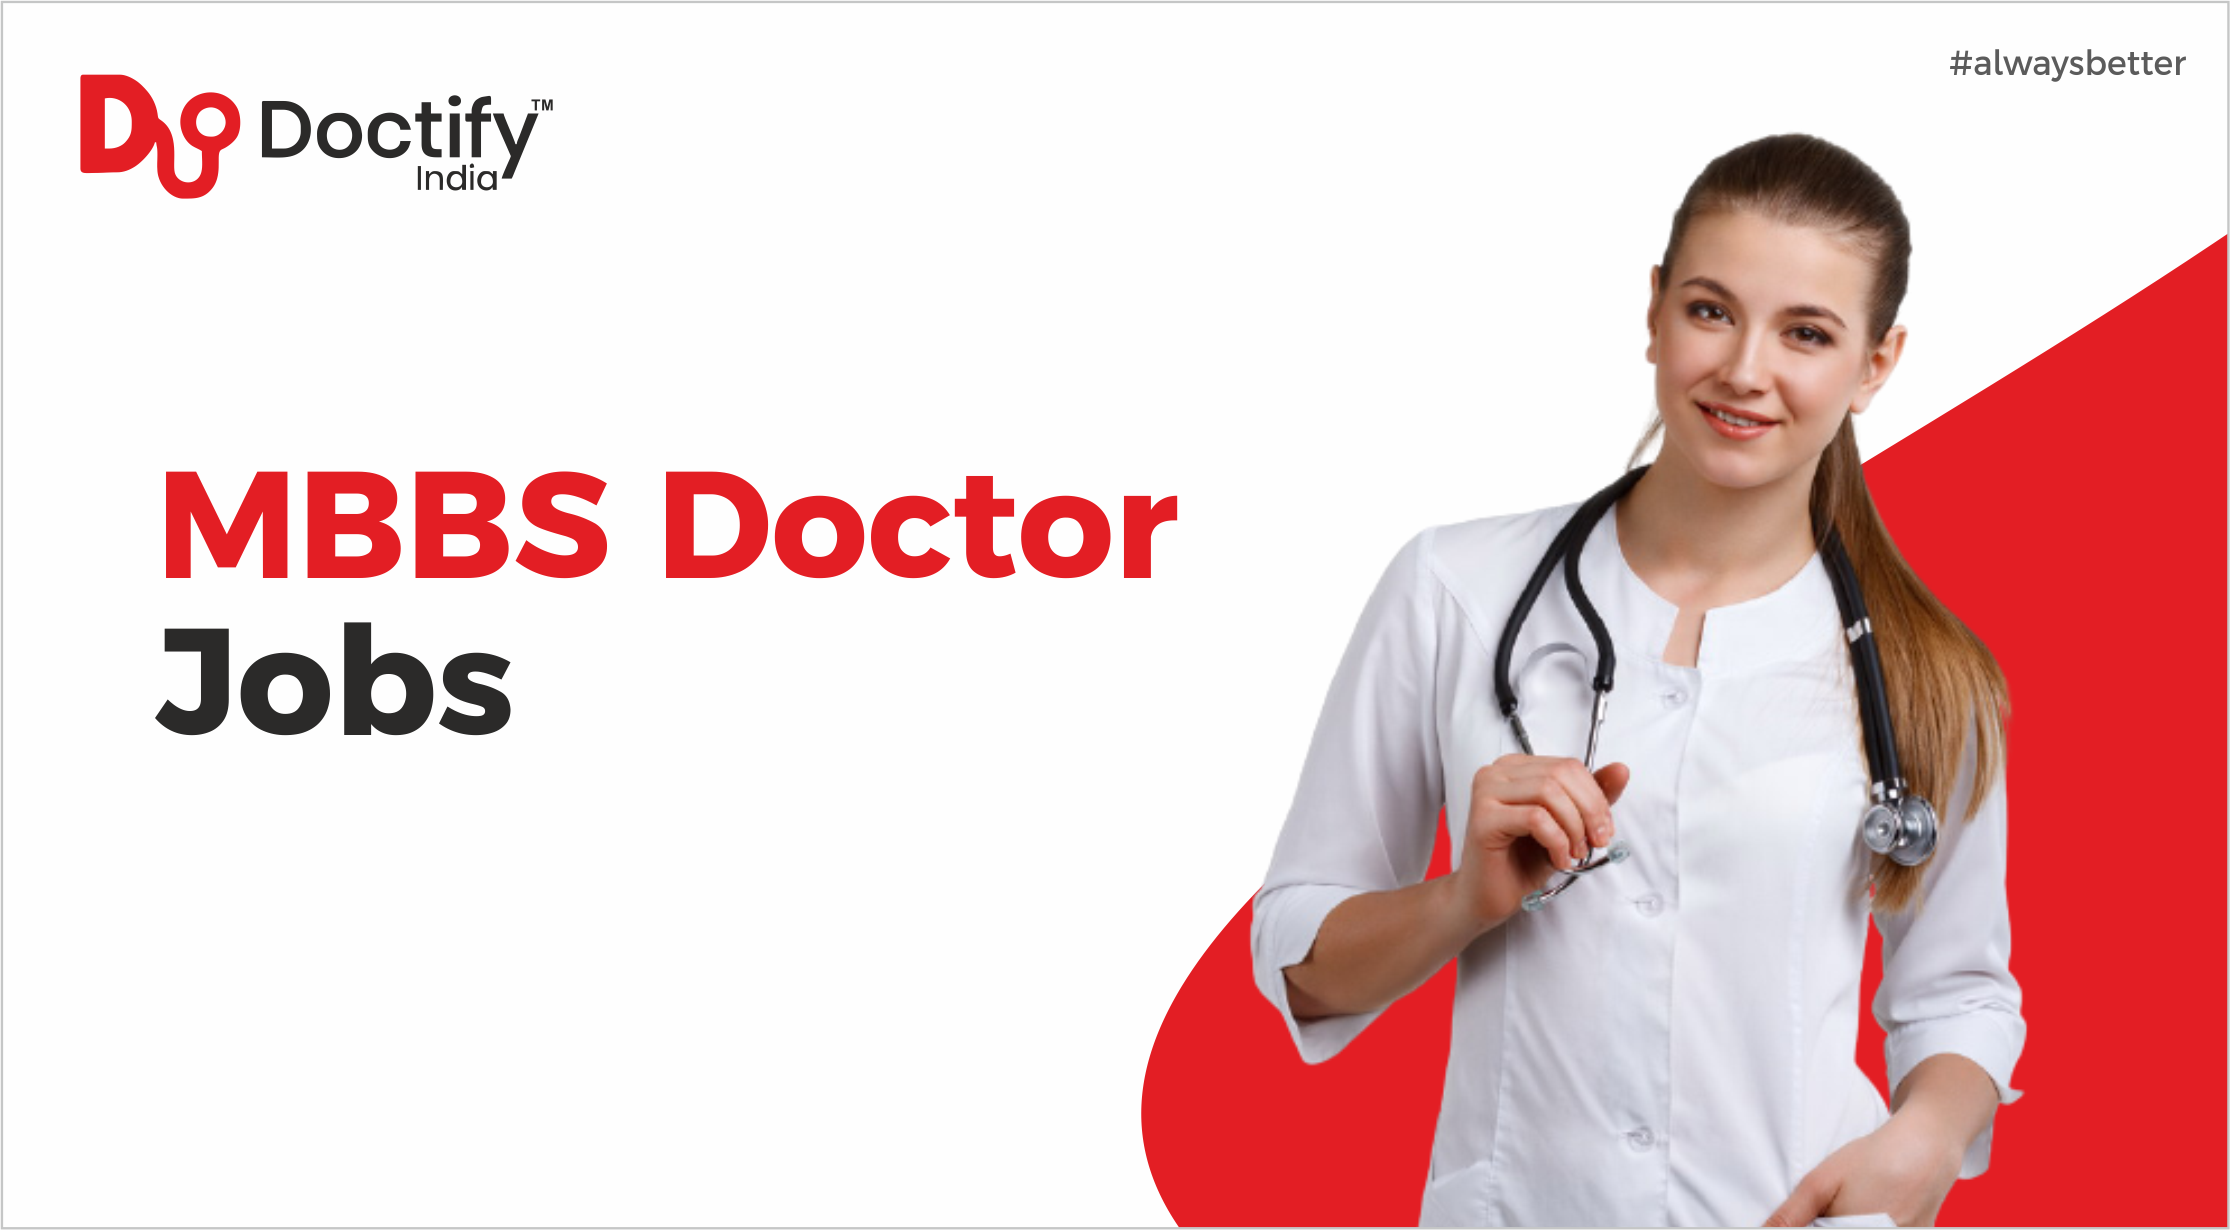 Search & Apply For The Latest New MBBS Job - Doctify India